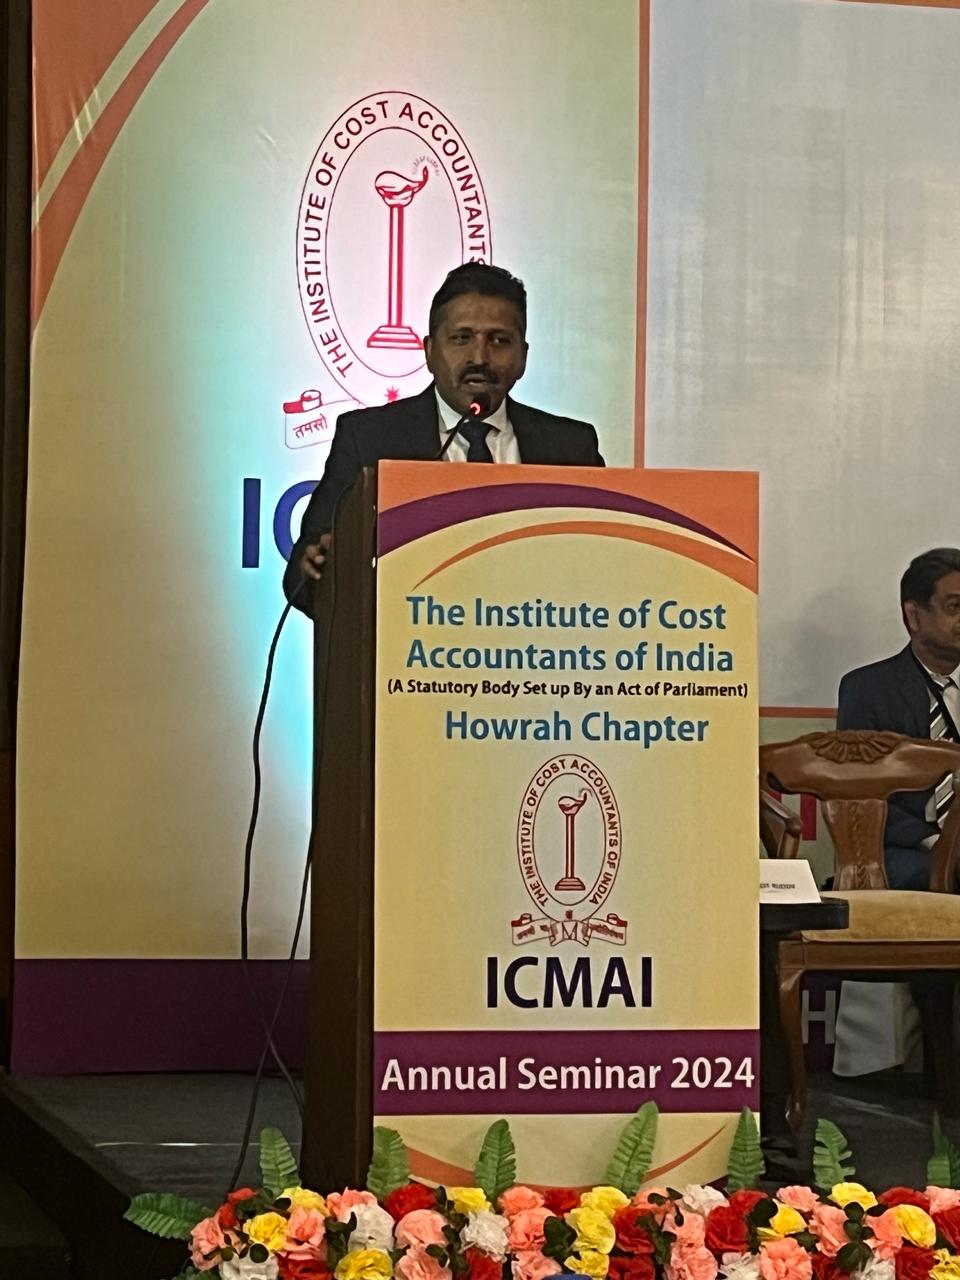 CMD GRSE as Chief Guest at Annual Seminar of ICMAI, Howrah Chapter on 27 Jan 24